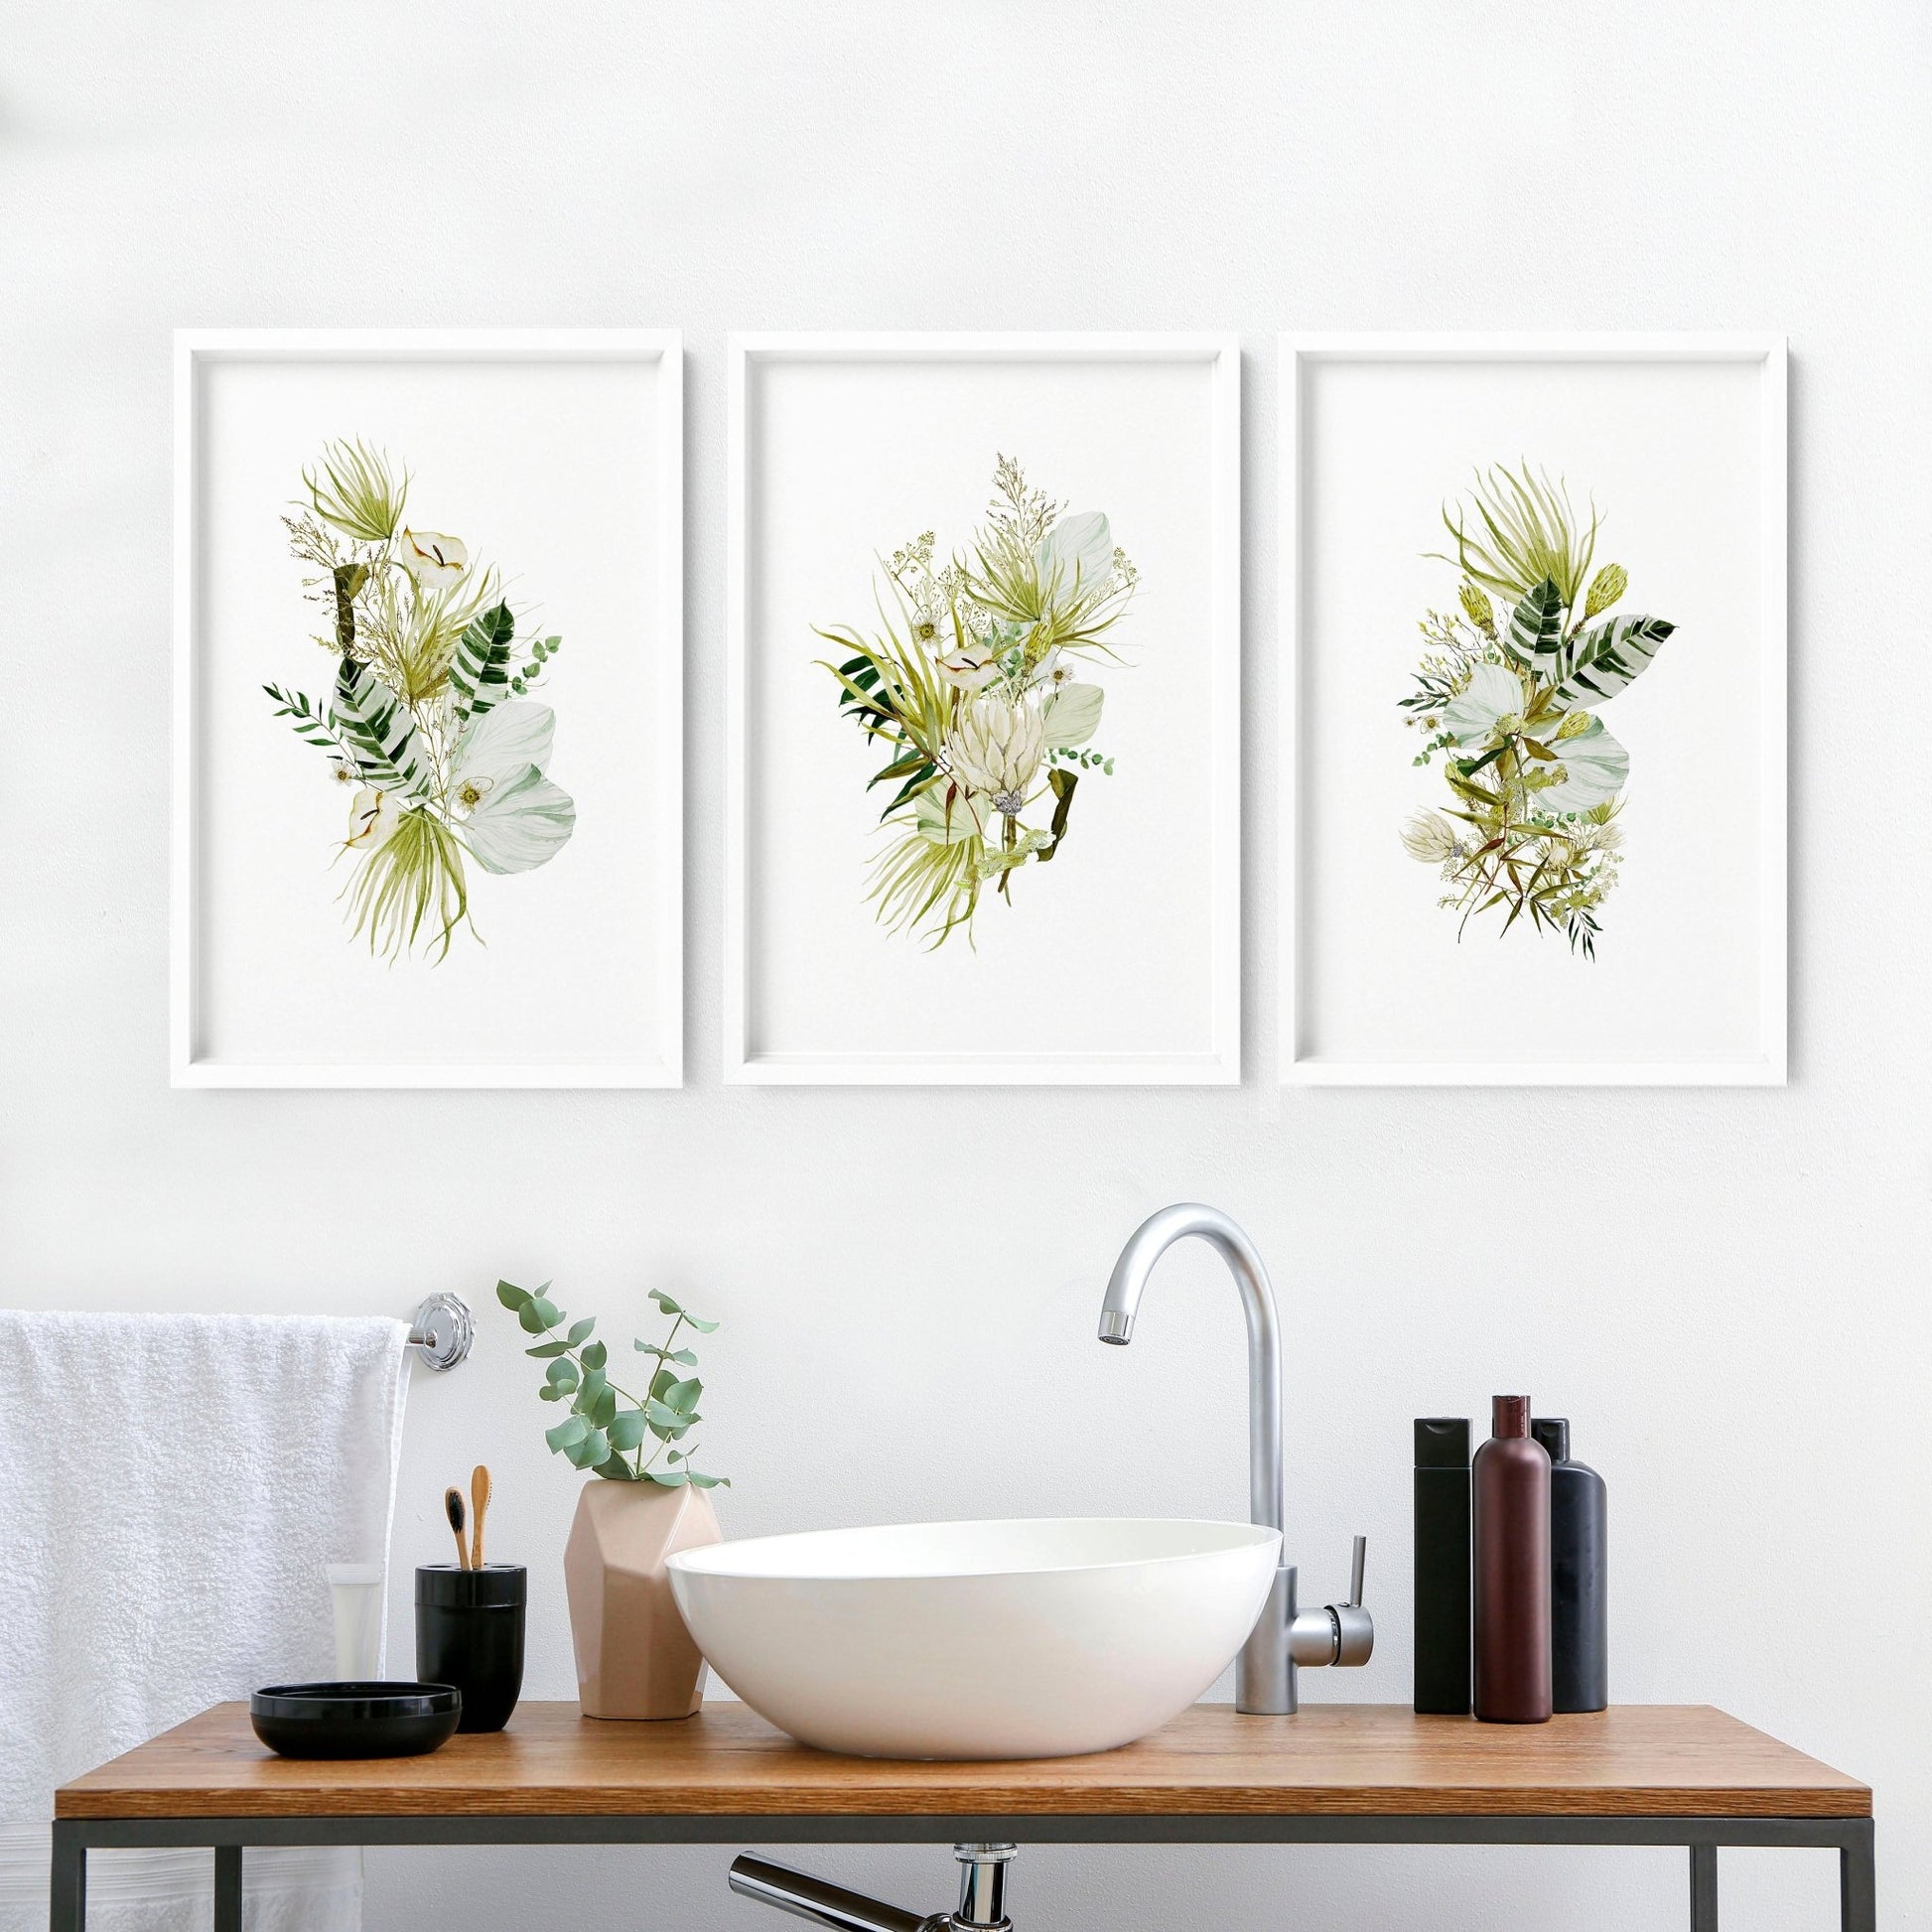 Farmhouse prints for a bathroom | set of 3 wall art - About Wall Art